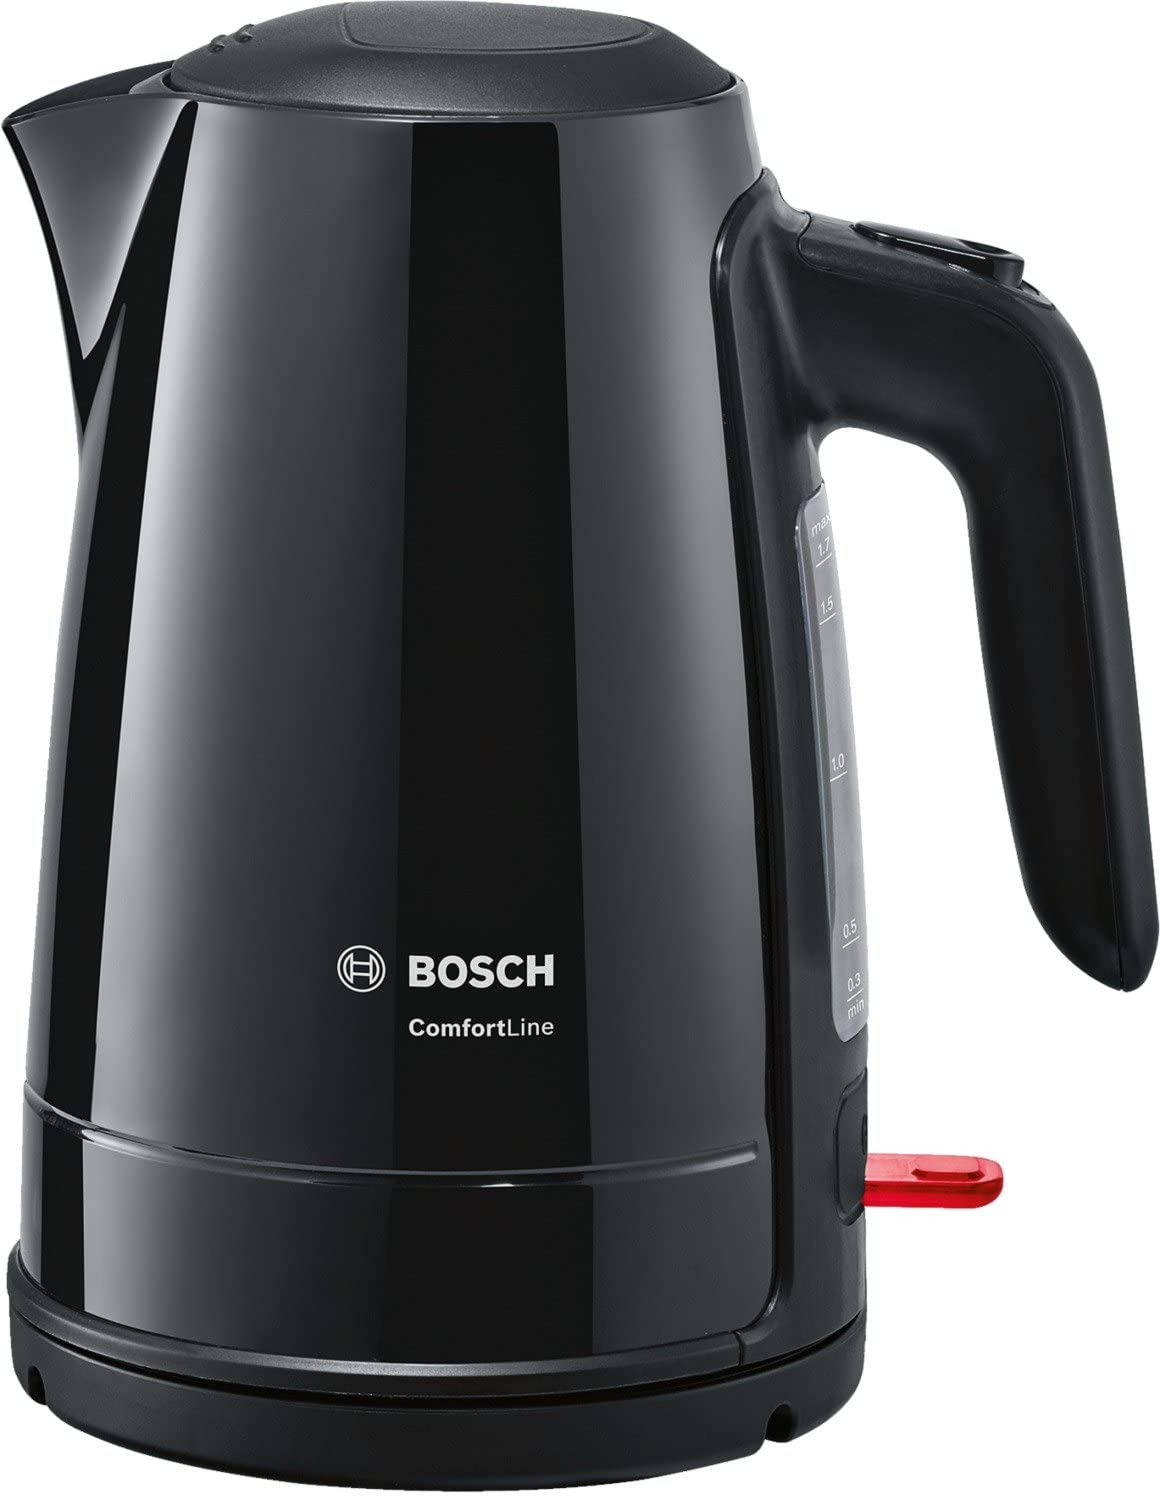 Bosch TWK6A013 ComfortLine Wireless Kettle, 1-Cup Function, Large Opening, Overheating Protection, Removable Limescale Filter, 1.7 L, 2400 W, Black